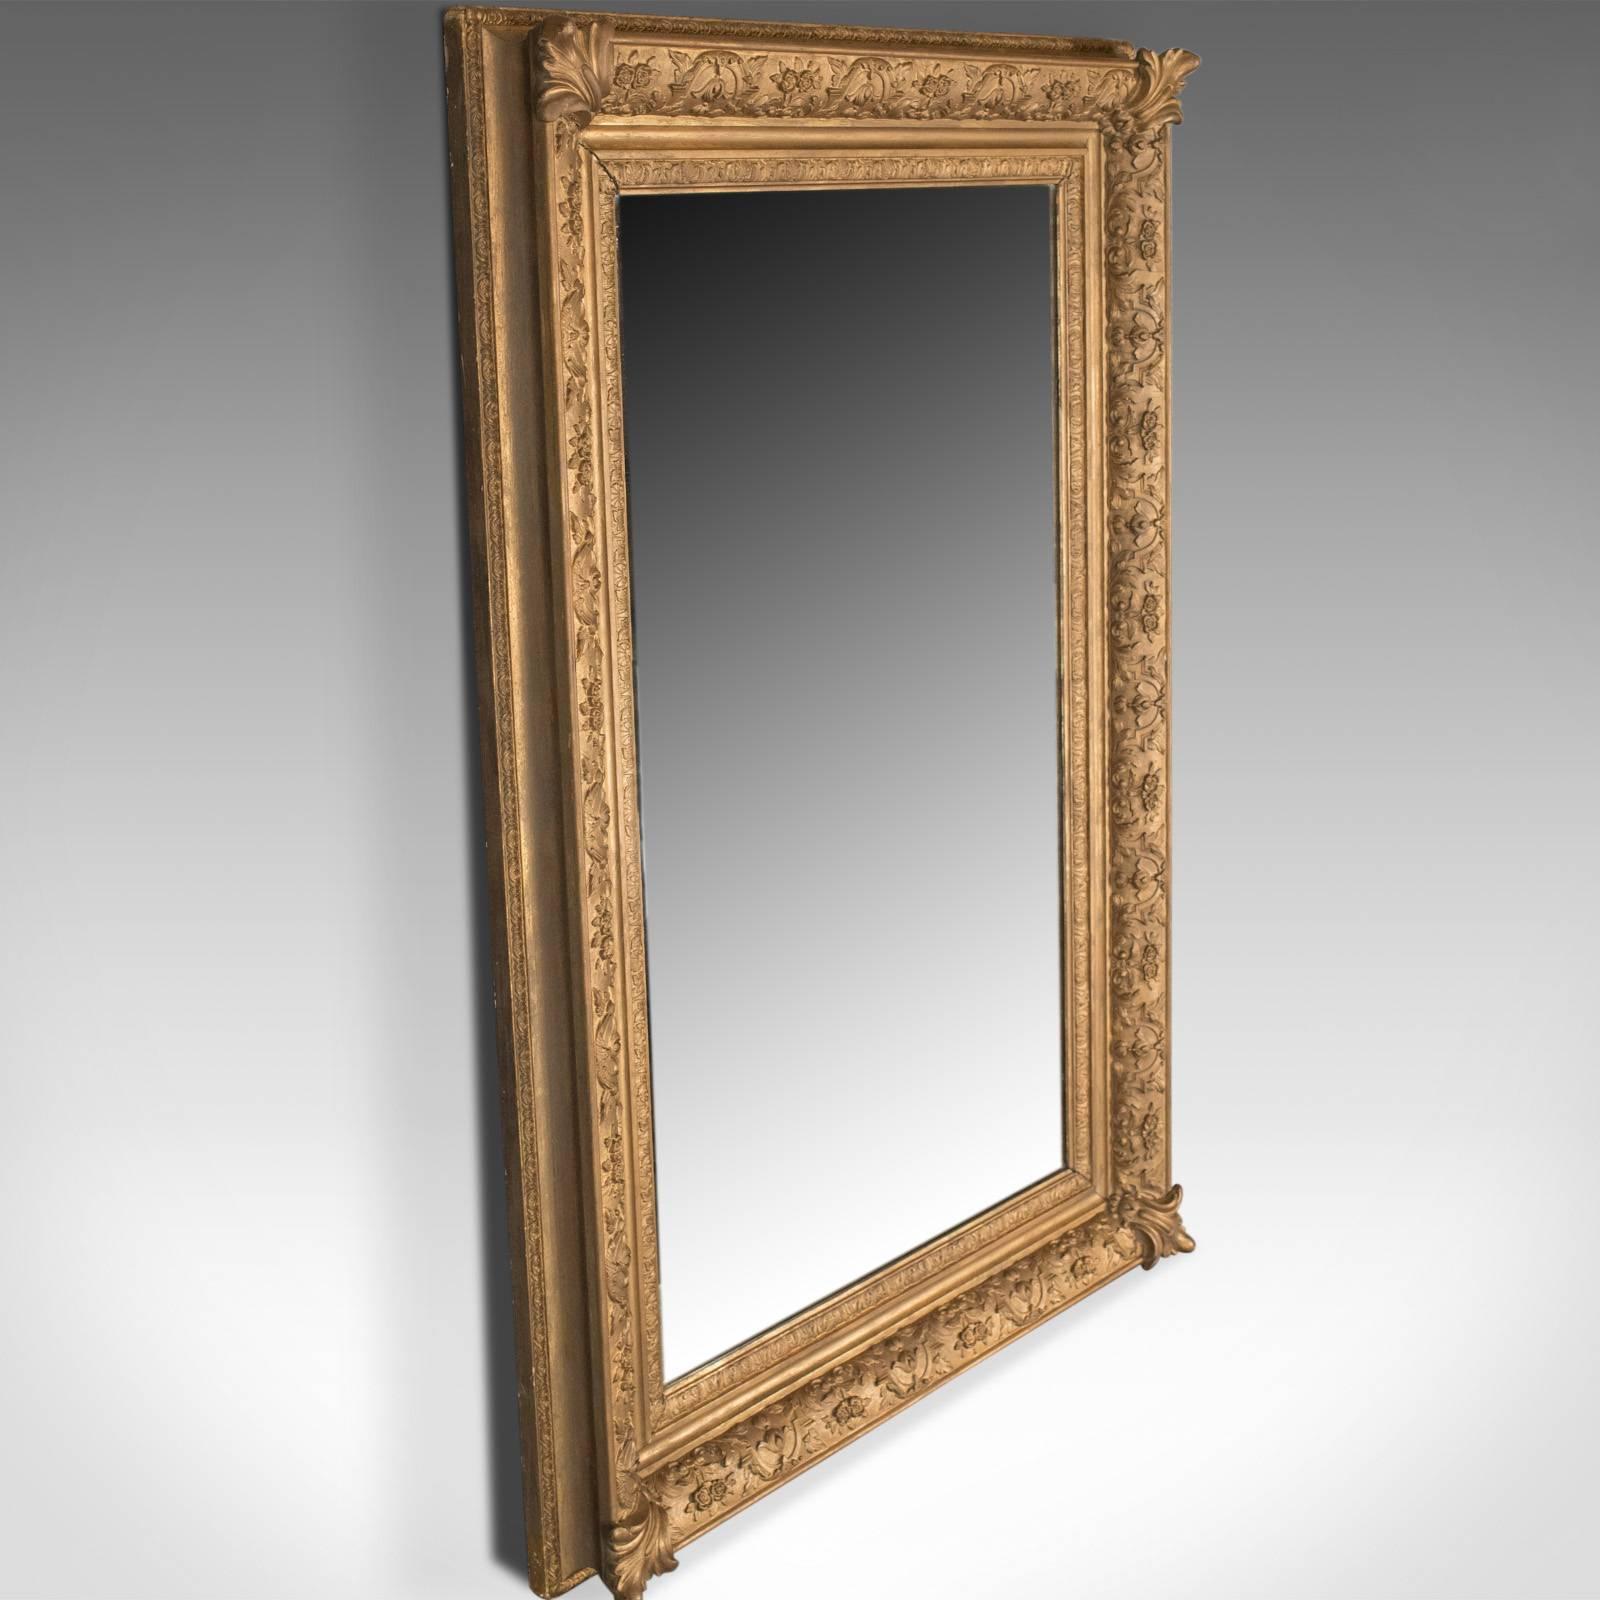 English Large Antique Wall Mirror, Victorian, Gilt Gesso Frame, Overmantel, circa 1880